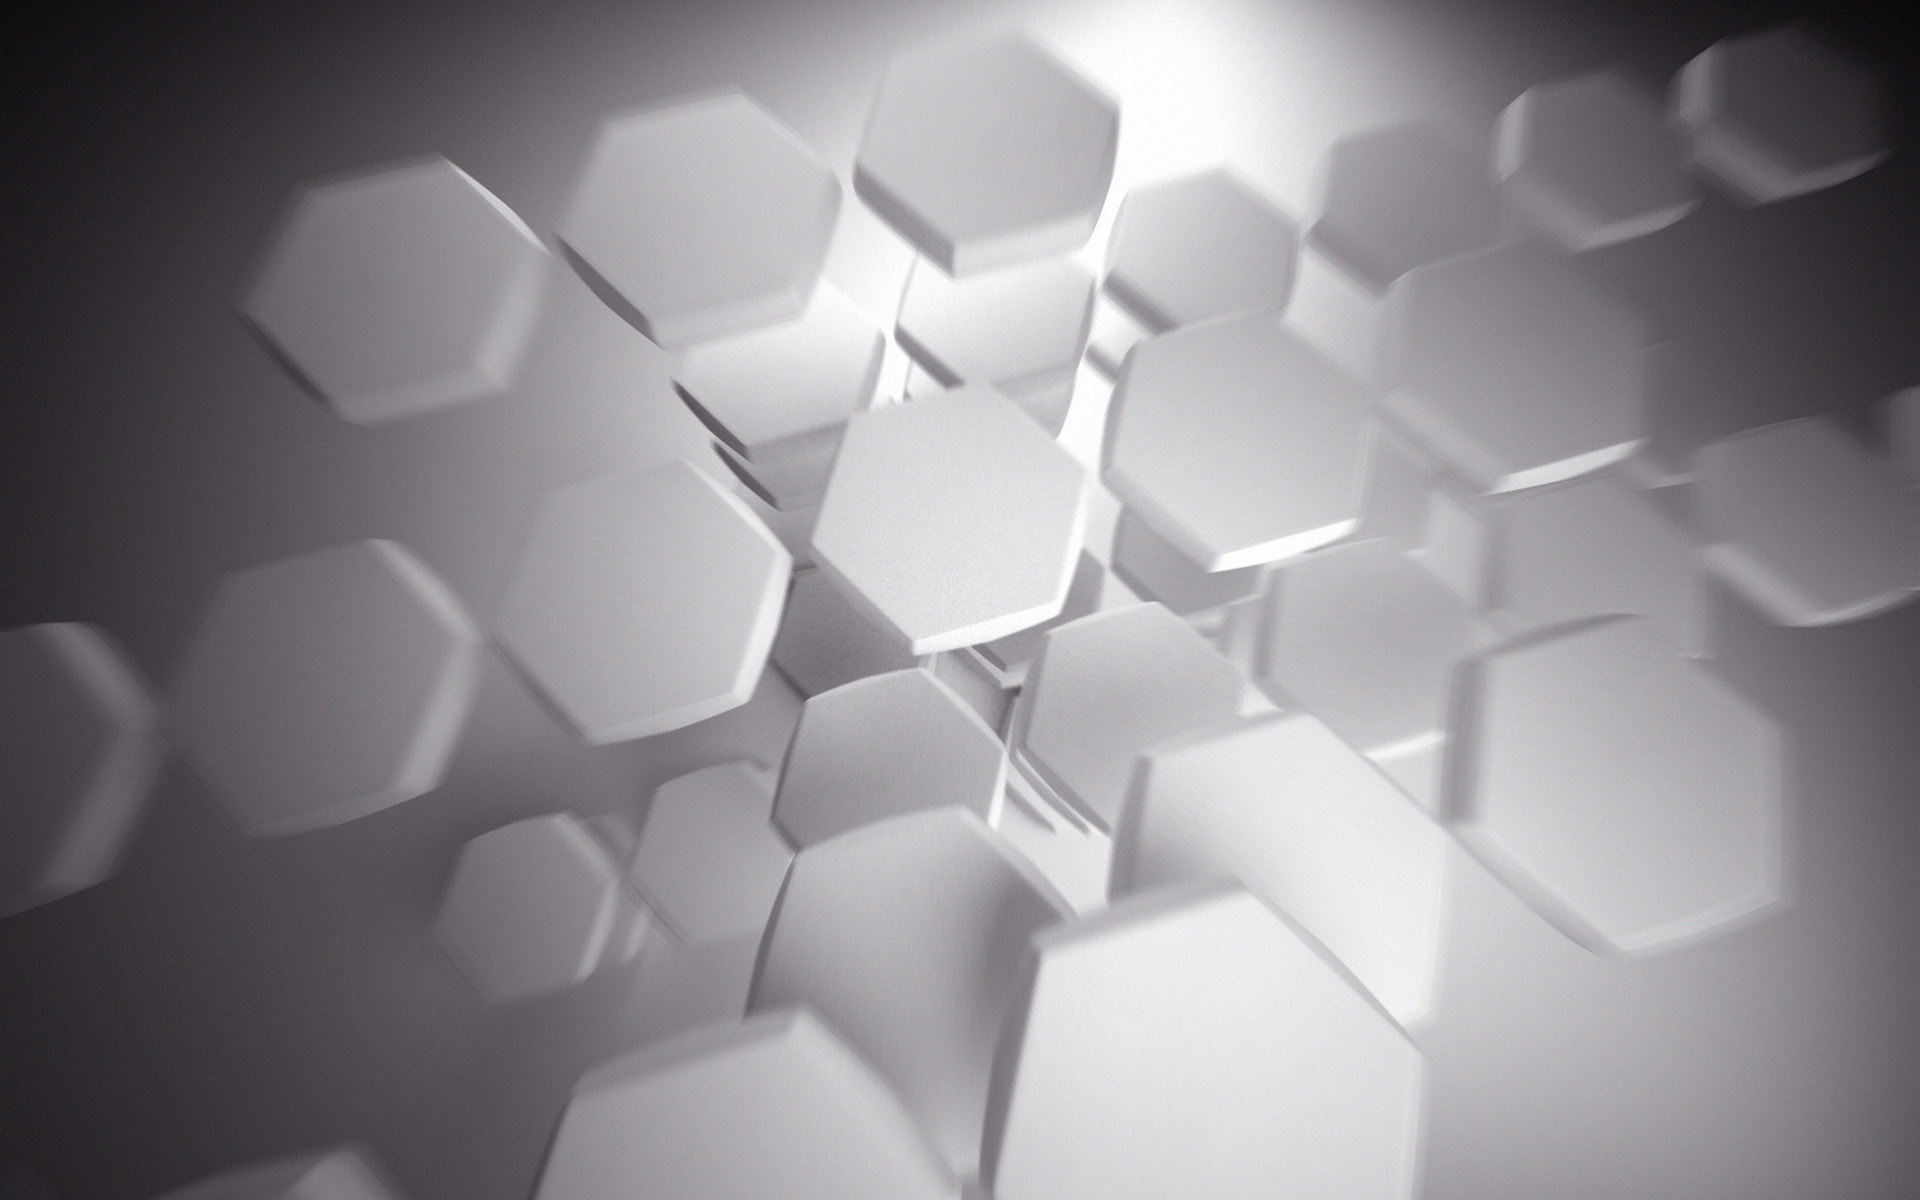 Colorful 3D geometric shapes create a captivating pattern in this vibrant desktop wallpaper.